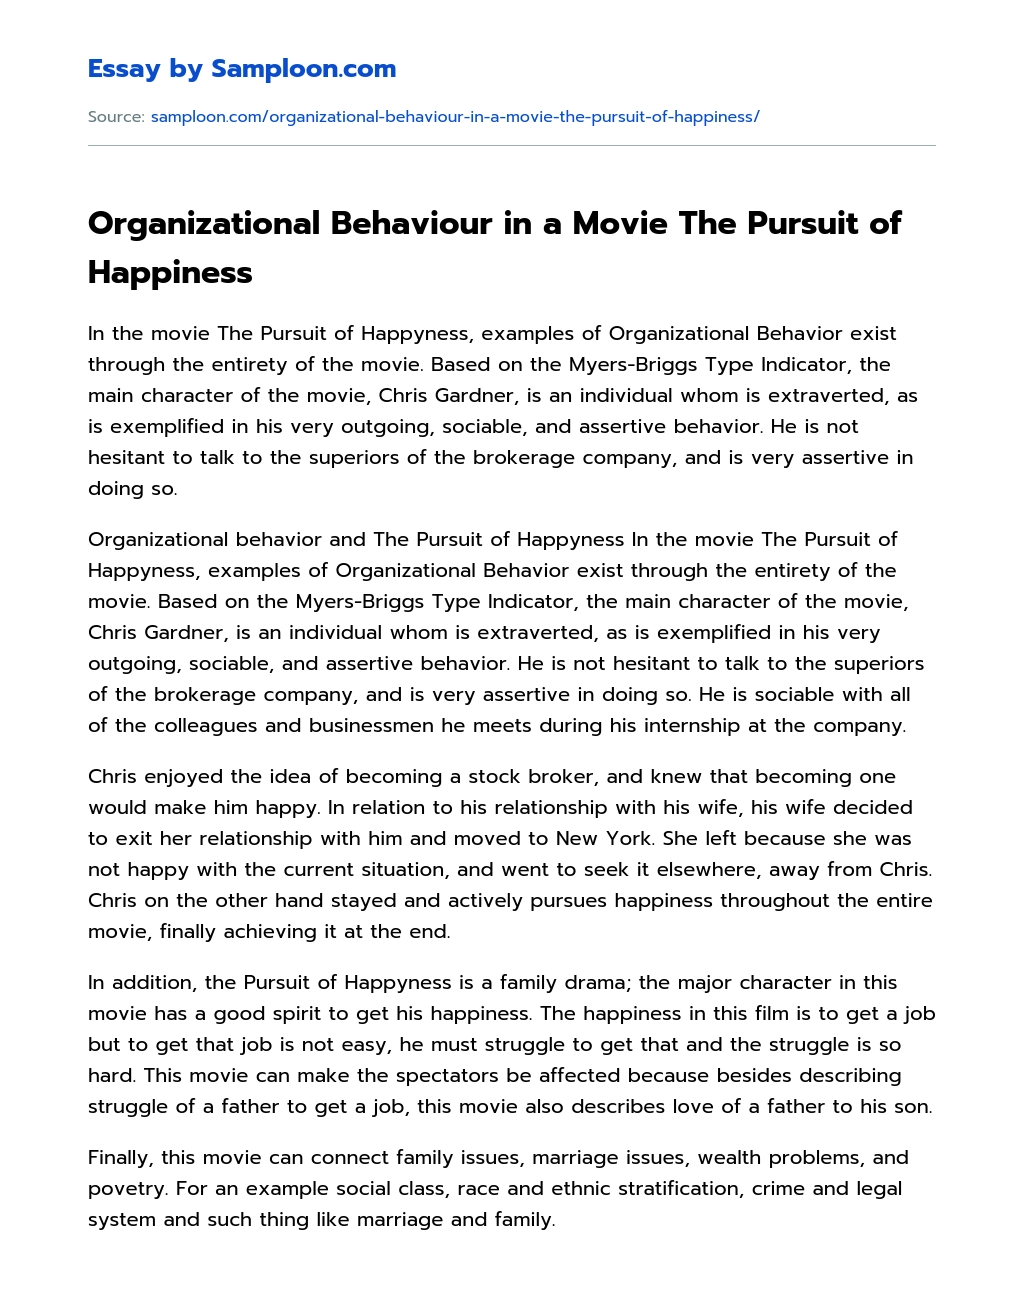 Organizational Behaviour in a Movie The Pursuit of Happiness essay